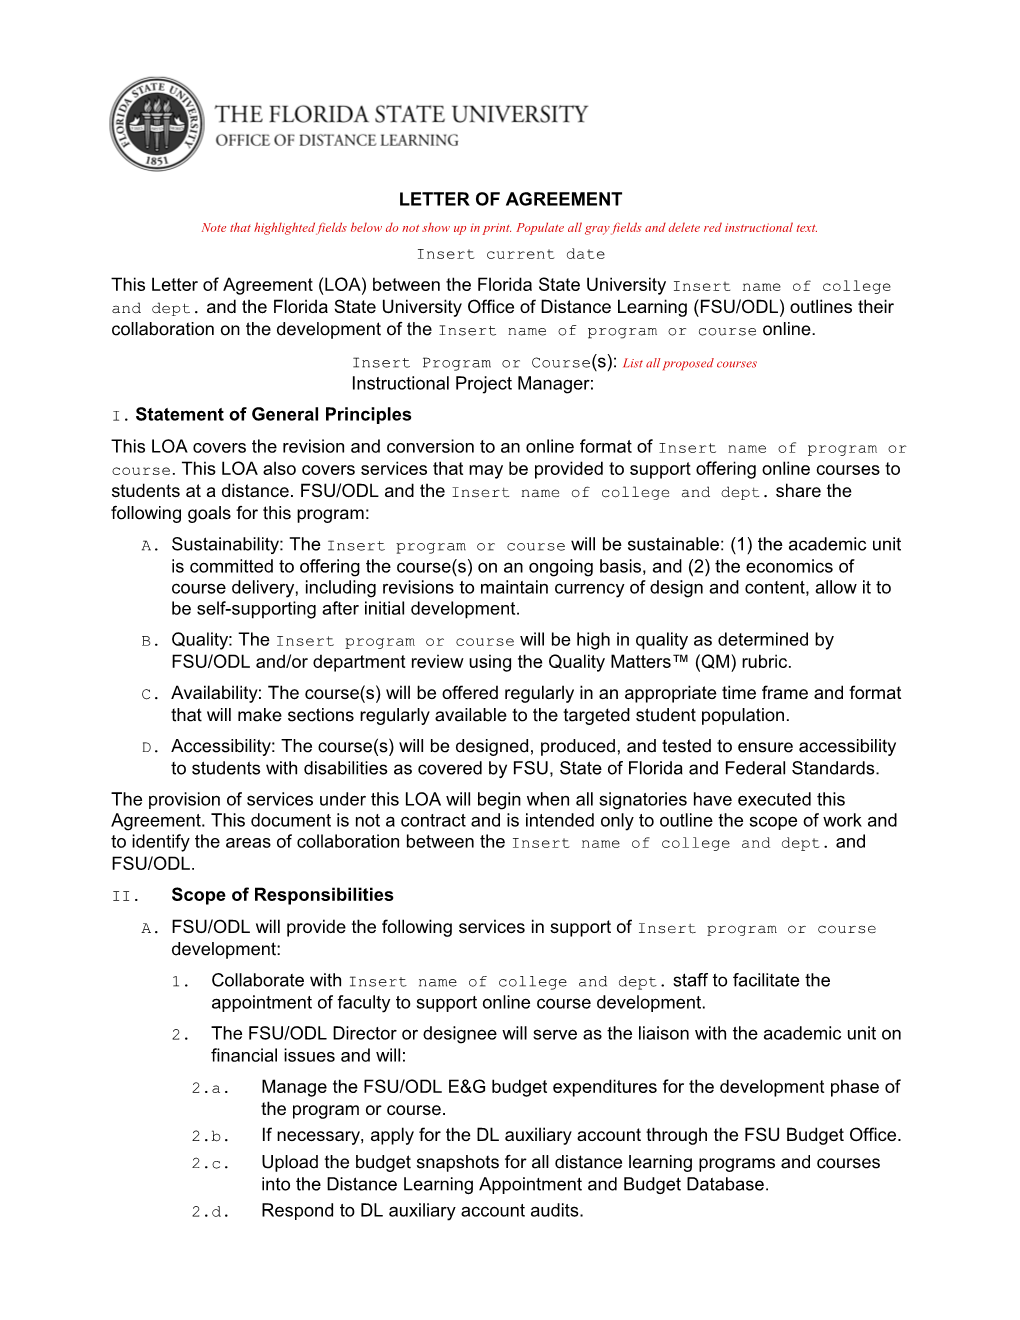 Letter of Agreement: FSU/Odlinsert Name of College/Department9/26/2018